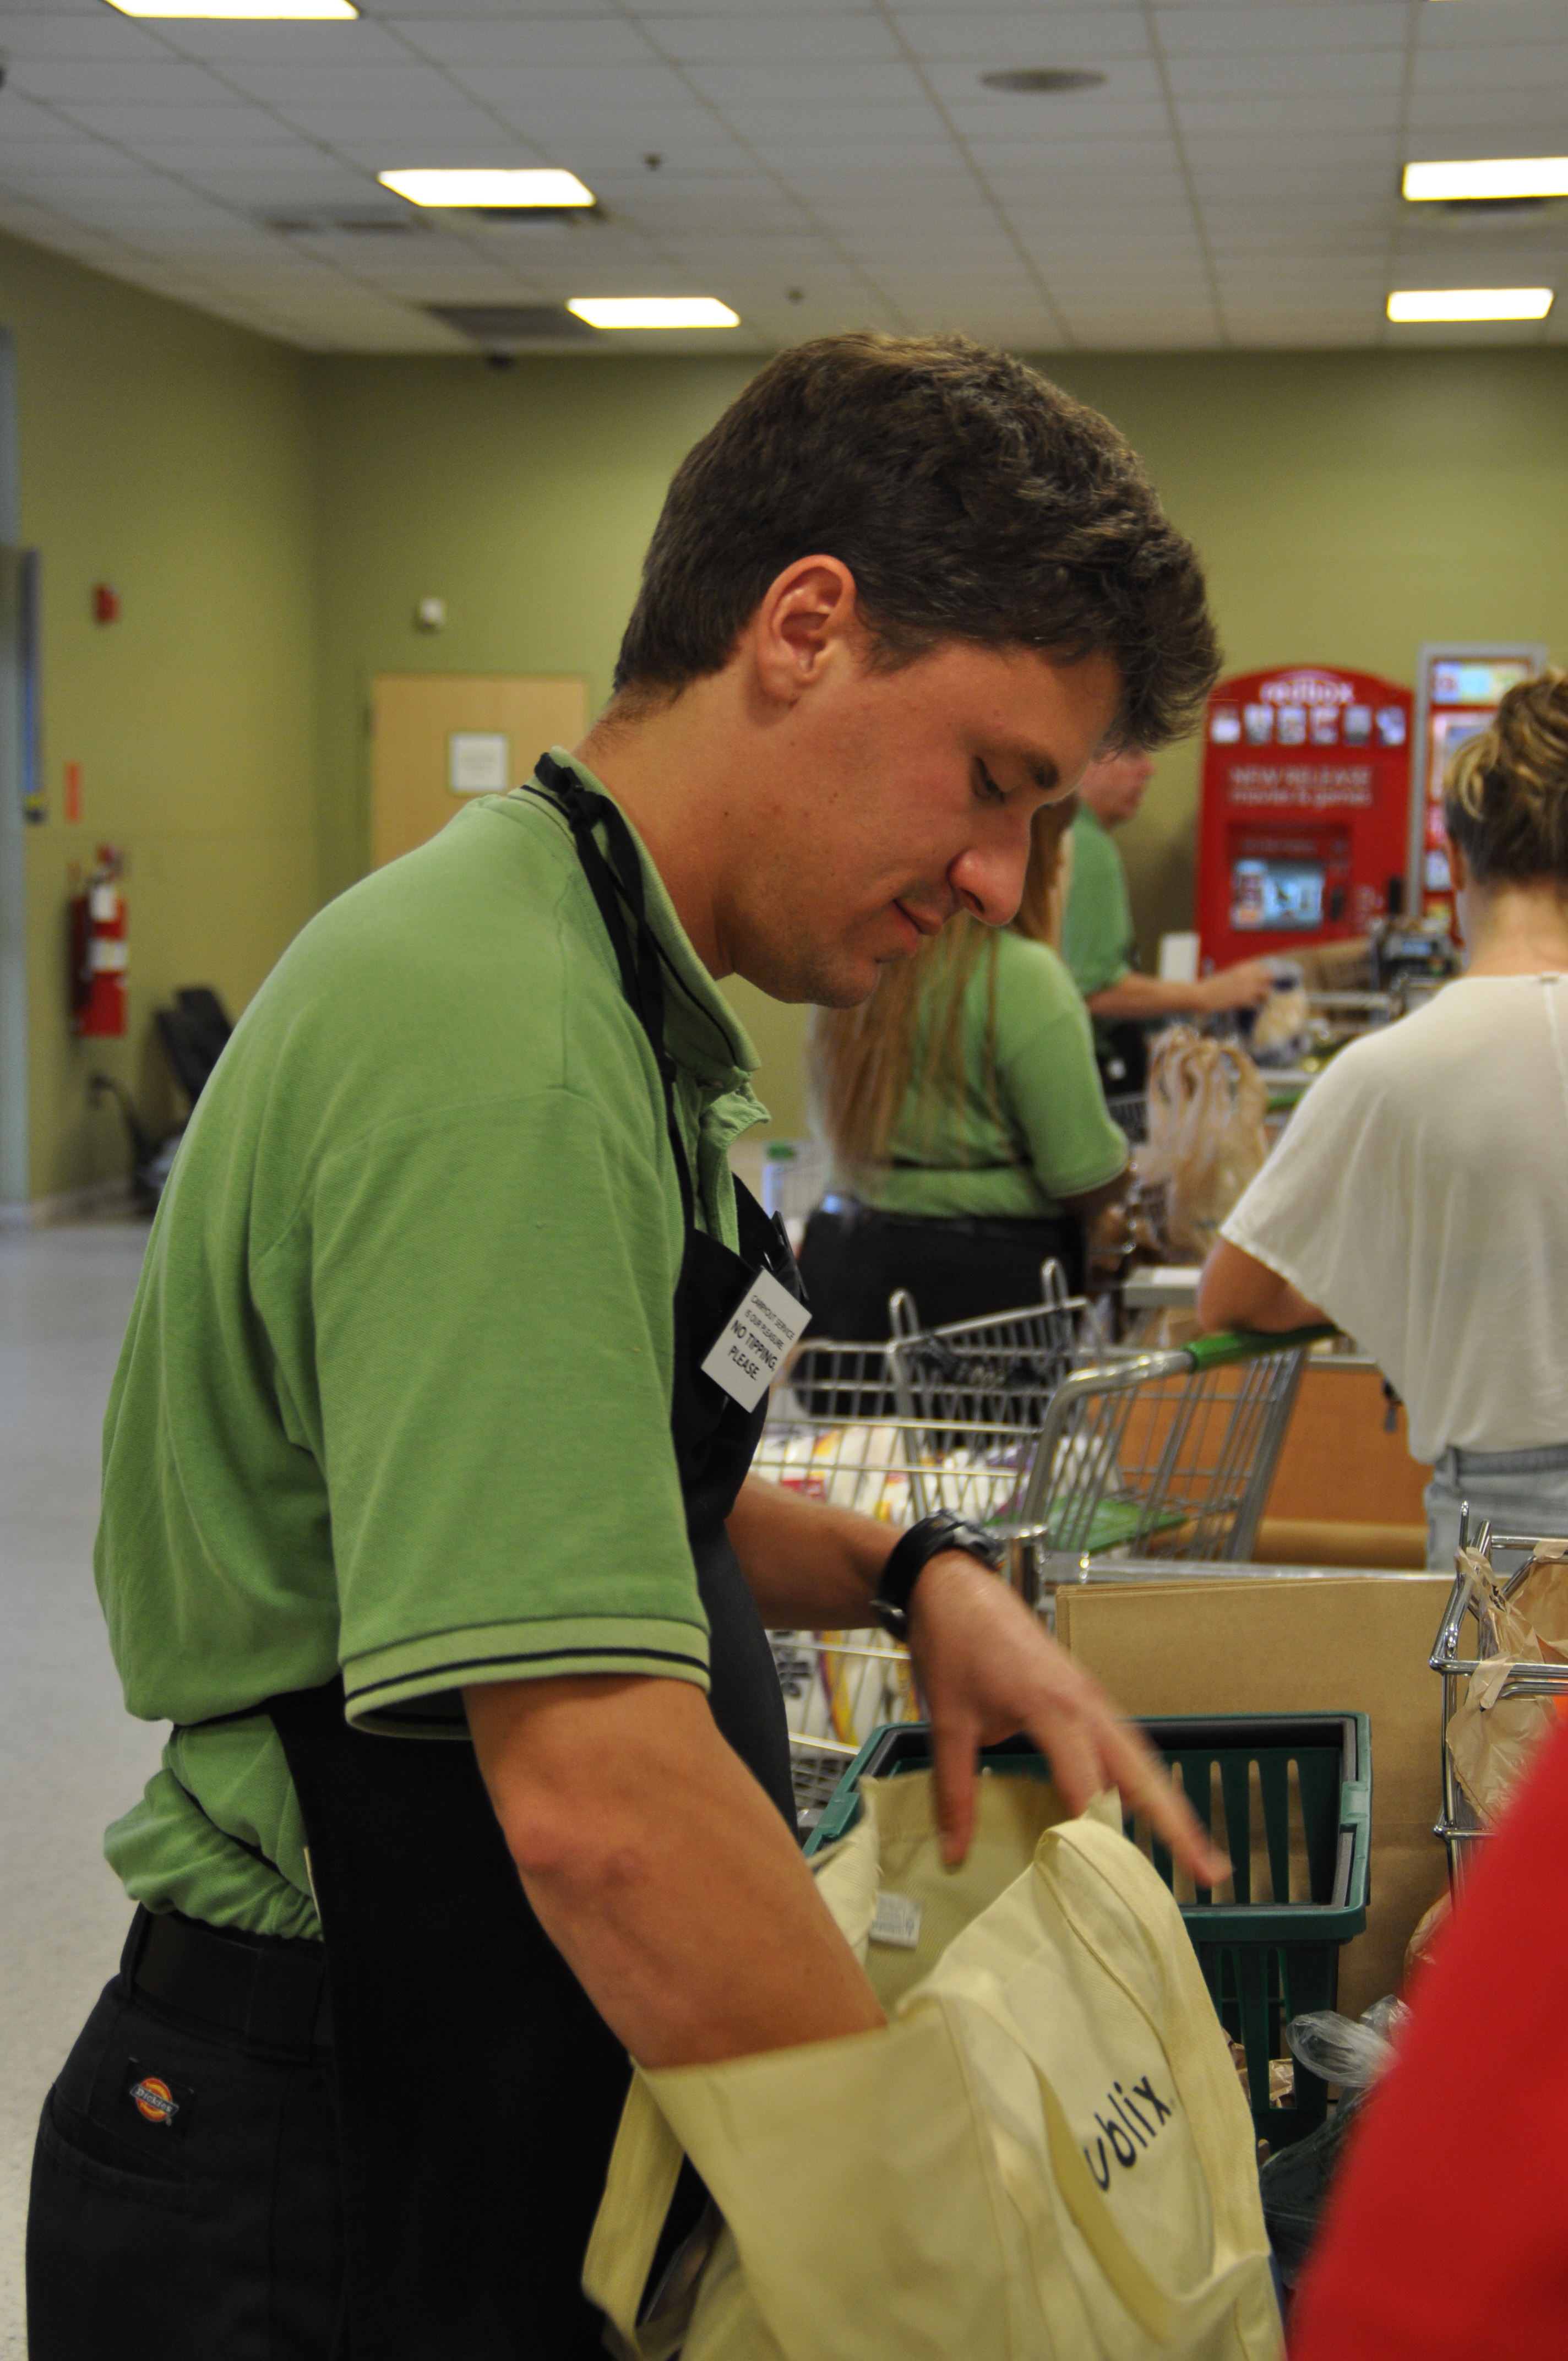 Glover also bags groceries, helps shoppers with their groceries, and cleans the store as needed. “Graham is willing to do anything that is asked of him. He is a loyal, dependable employee,” said Publix Store Manager Howard Nishimoto.